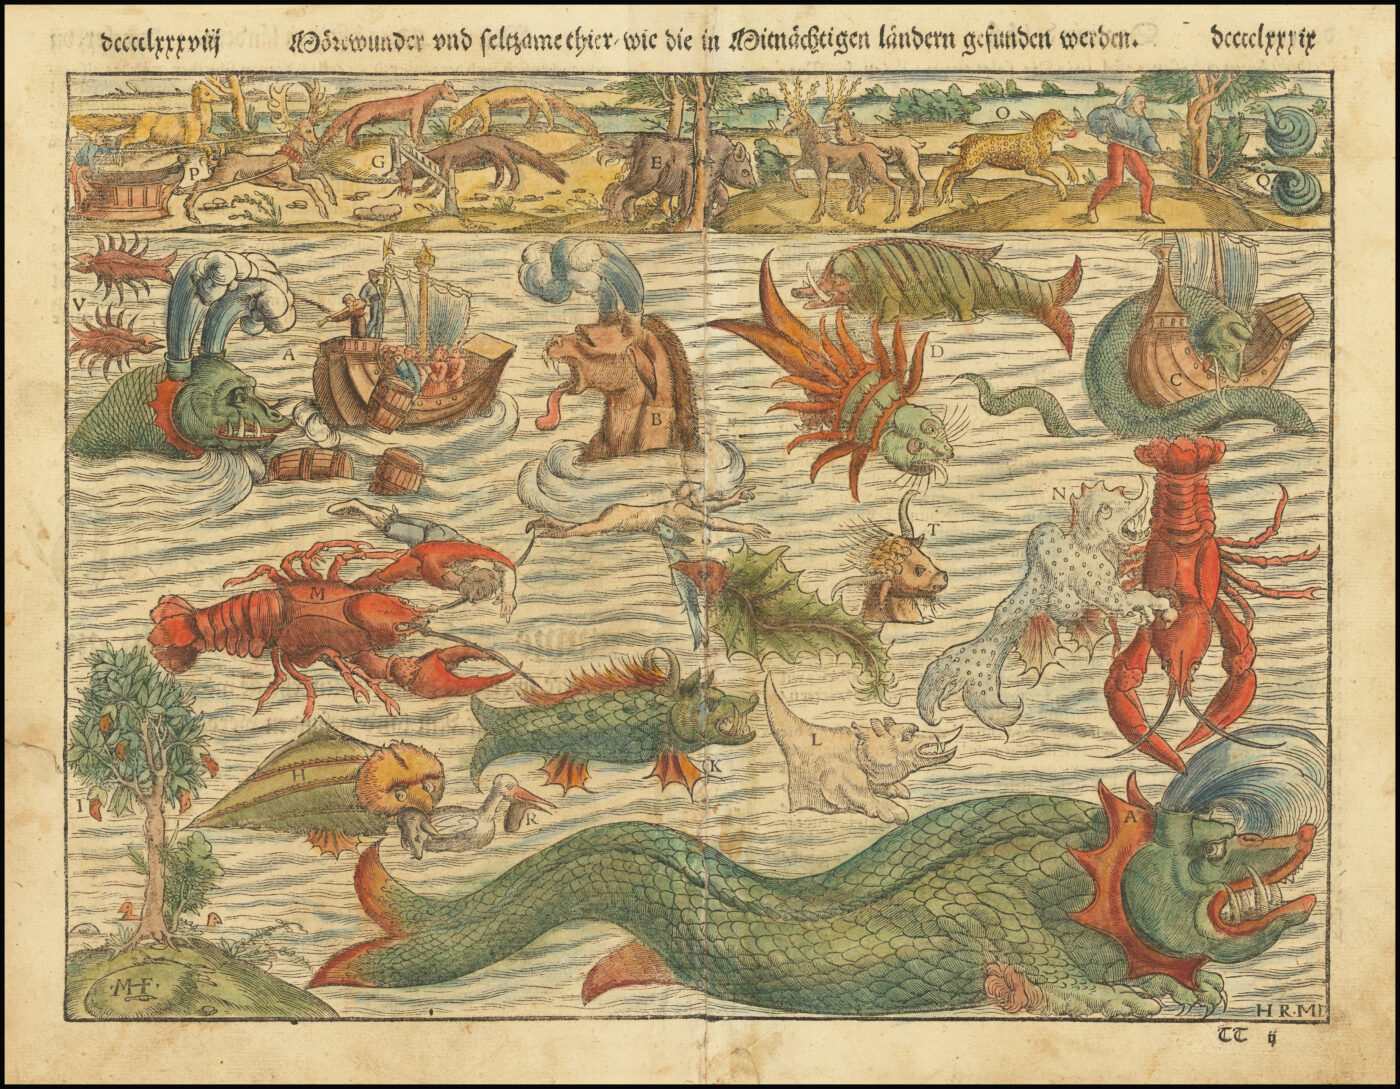 Sebastian Münster, 1570 edition of the Chart of Sea Monsters